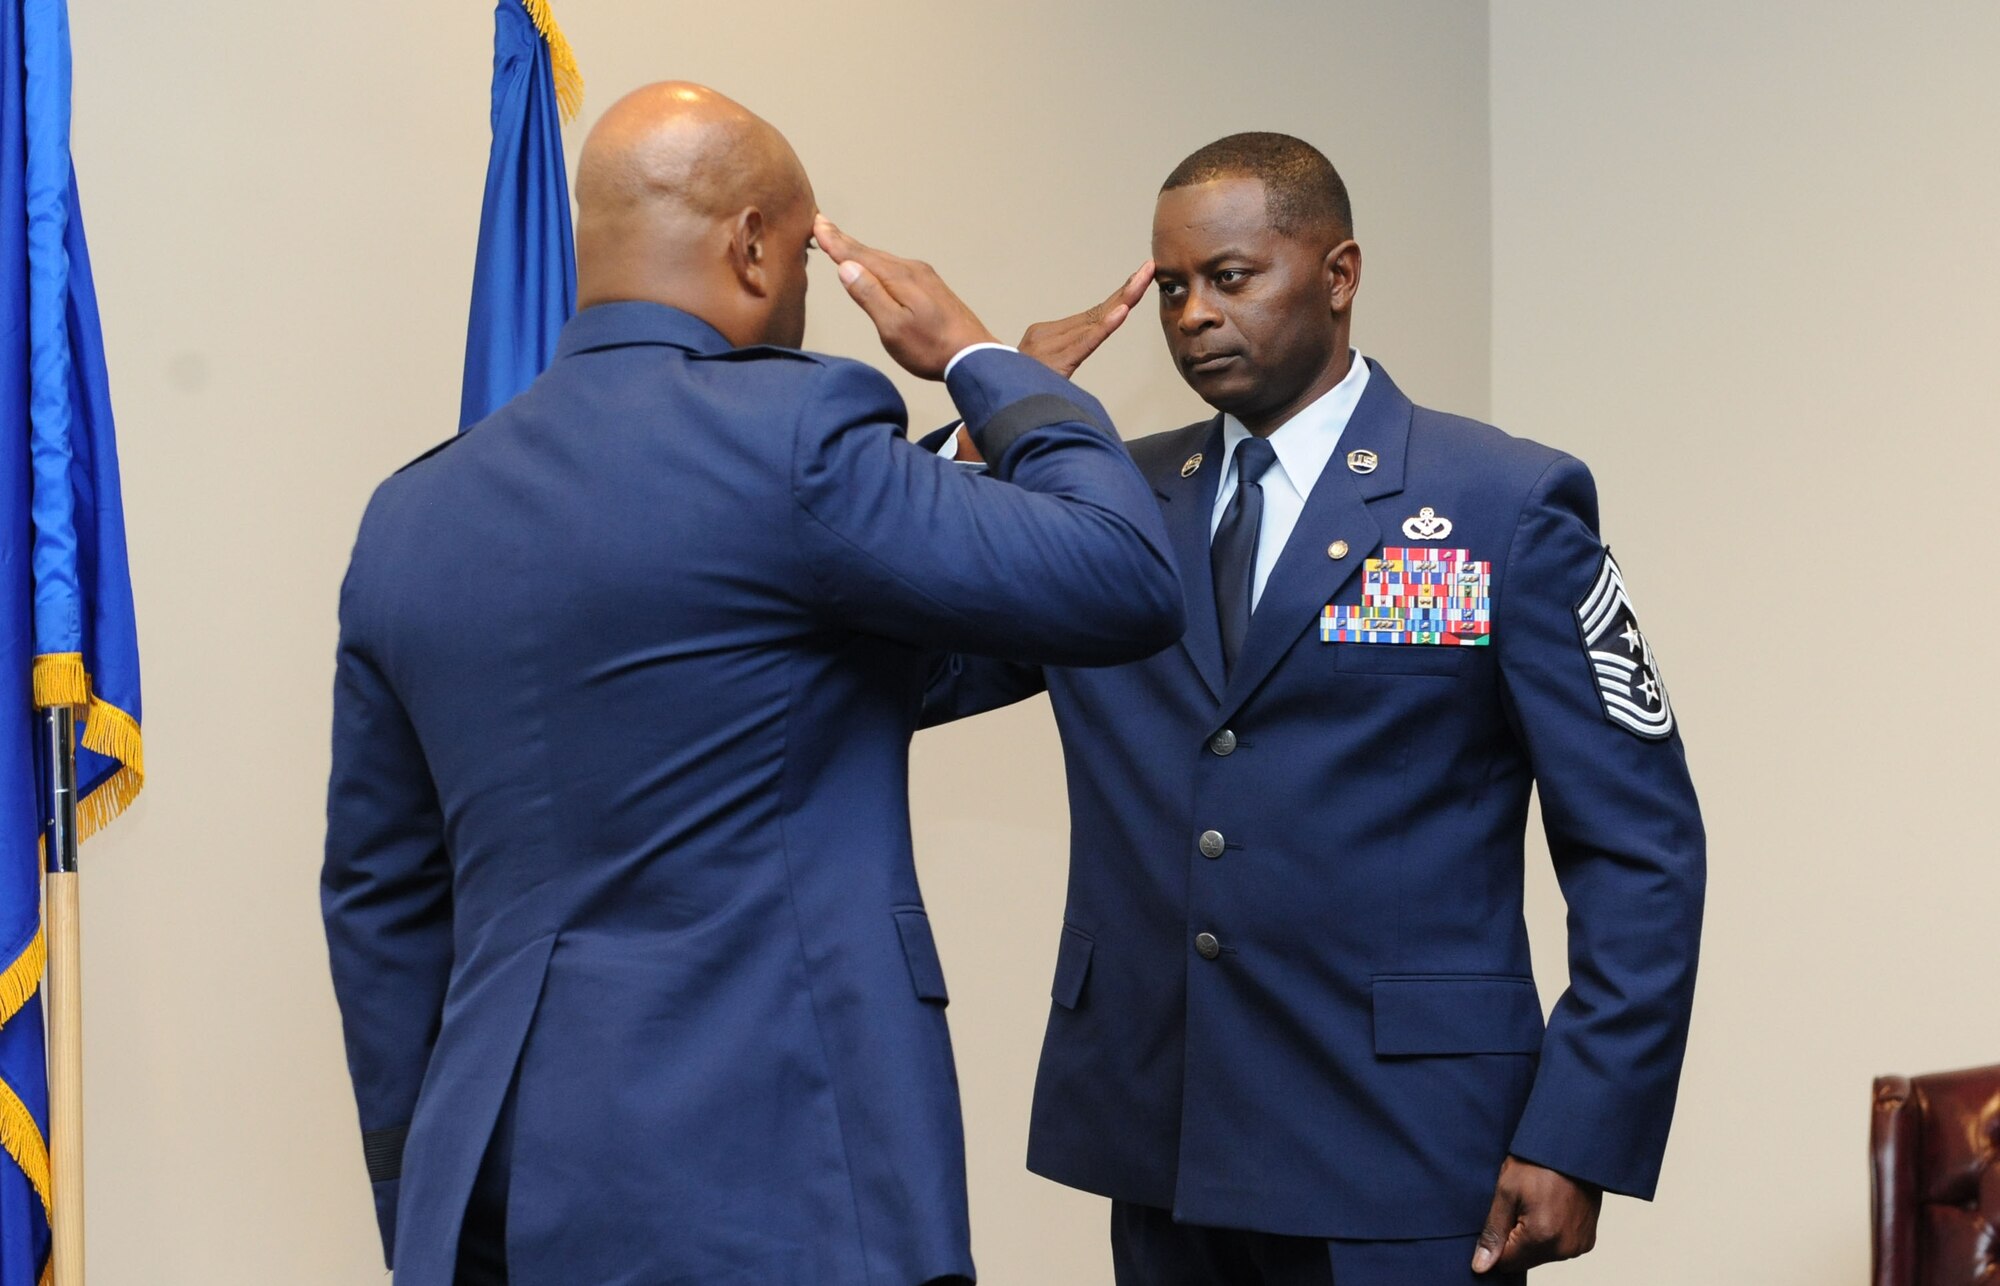 Chief Master Sgt. Harry Hutchinson, 81st Training Wing command chief, salutes Brig. Gen. Trent Edwards, Headquarters Air Force Space Command financial management and comptroller director, Peterson Air Force Base, Colo., during his retirement ceremony at the Roberts Consolidated Aircraft Maintenance Facility Aug. 19, 2016, on Keesler AFB, Miss. Hutchinson retired with more than 29 years of military service and served multiple assignments in Washington state, Korea, Maryland, Japan, Nevada, South Dakota and Africa. He also worked as the superintendent of the U.S. Army’s RED HORSE sites in Iraq and Afghanistan and the Air Force’s 732nd Expeditionary Prime BEEF squadron. (U.S. Air Force photo by Kemberly Groue/Released)